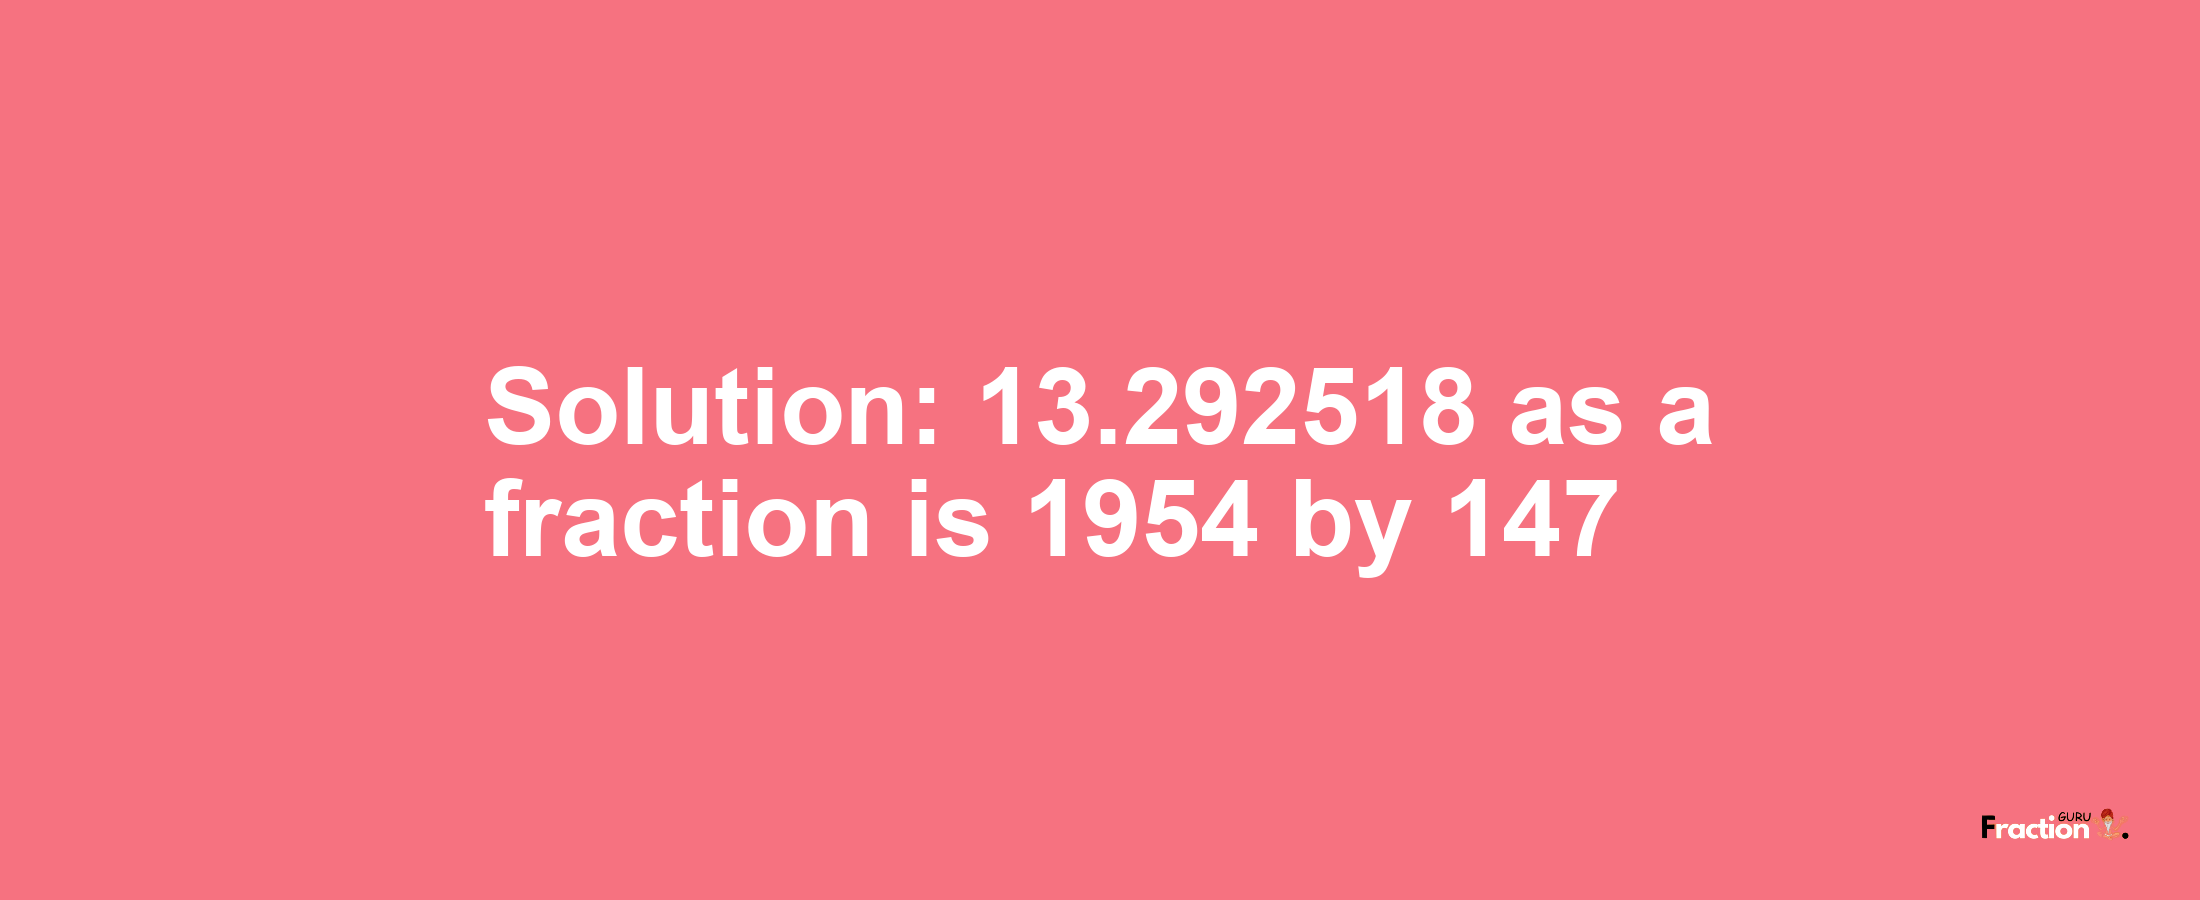 Solution:13.292518 as a fraction is 1954/147